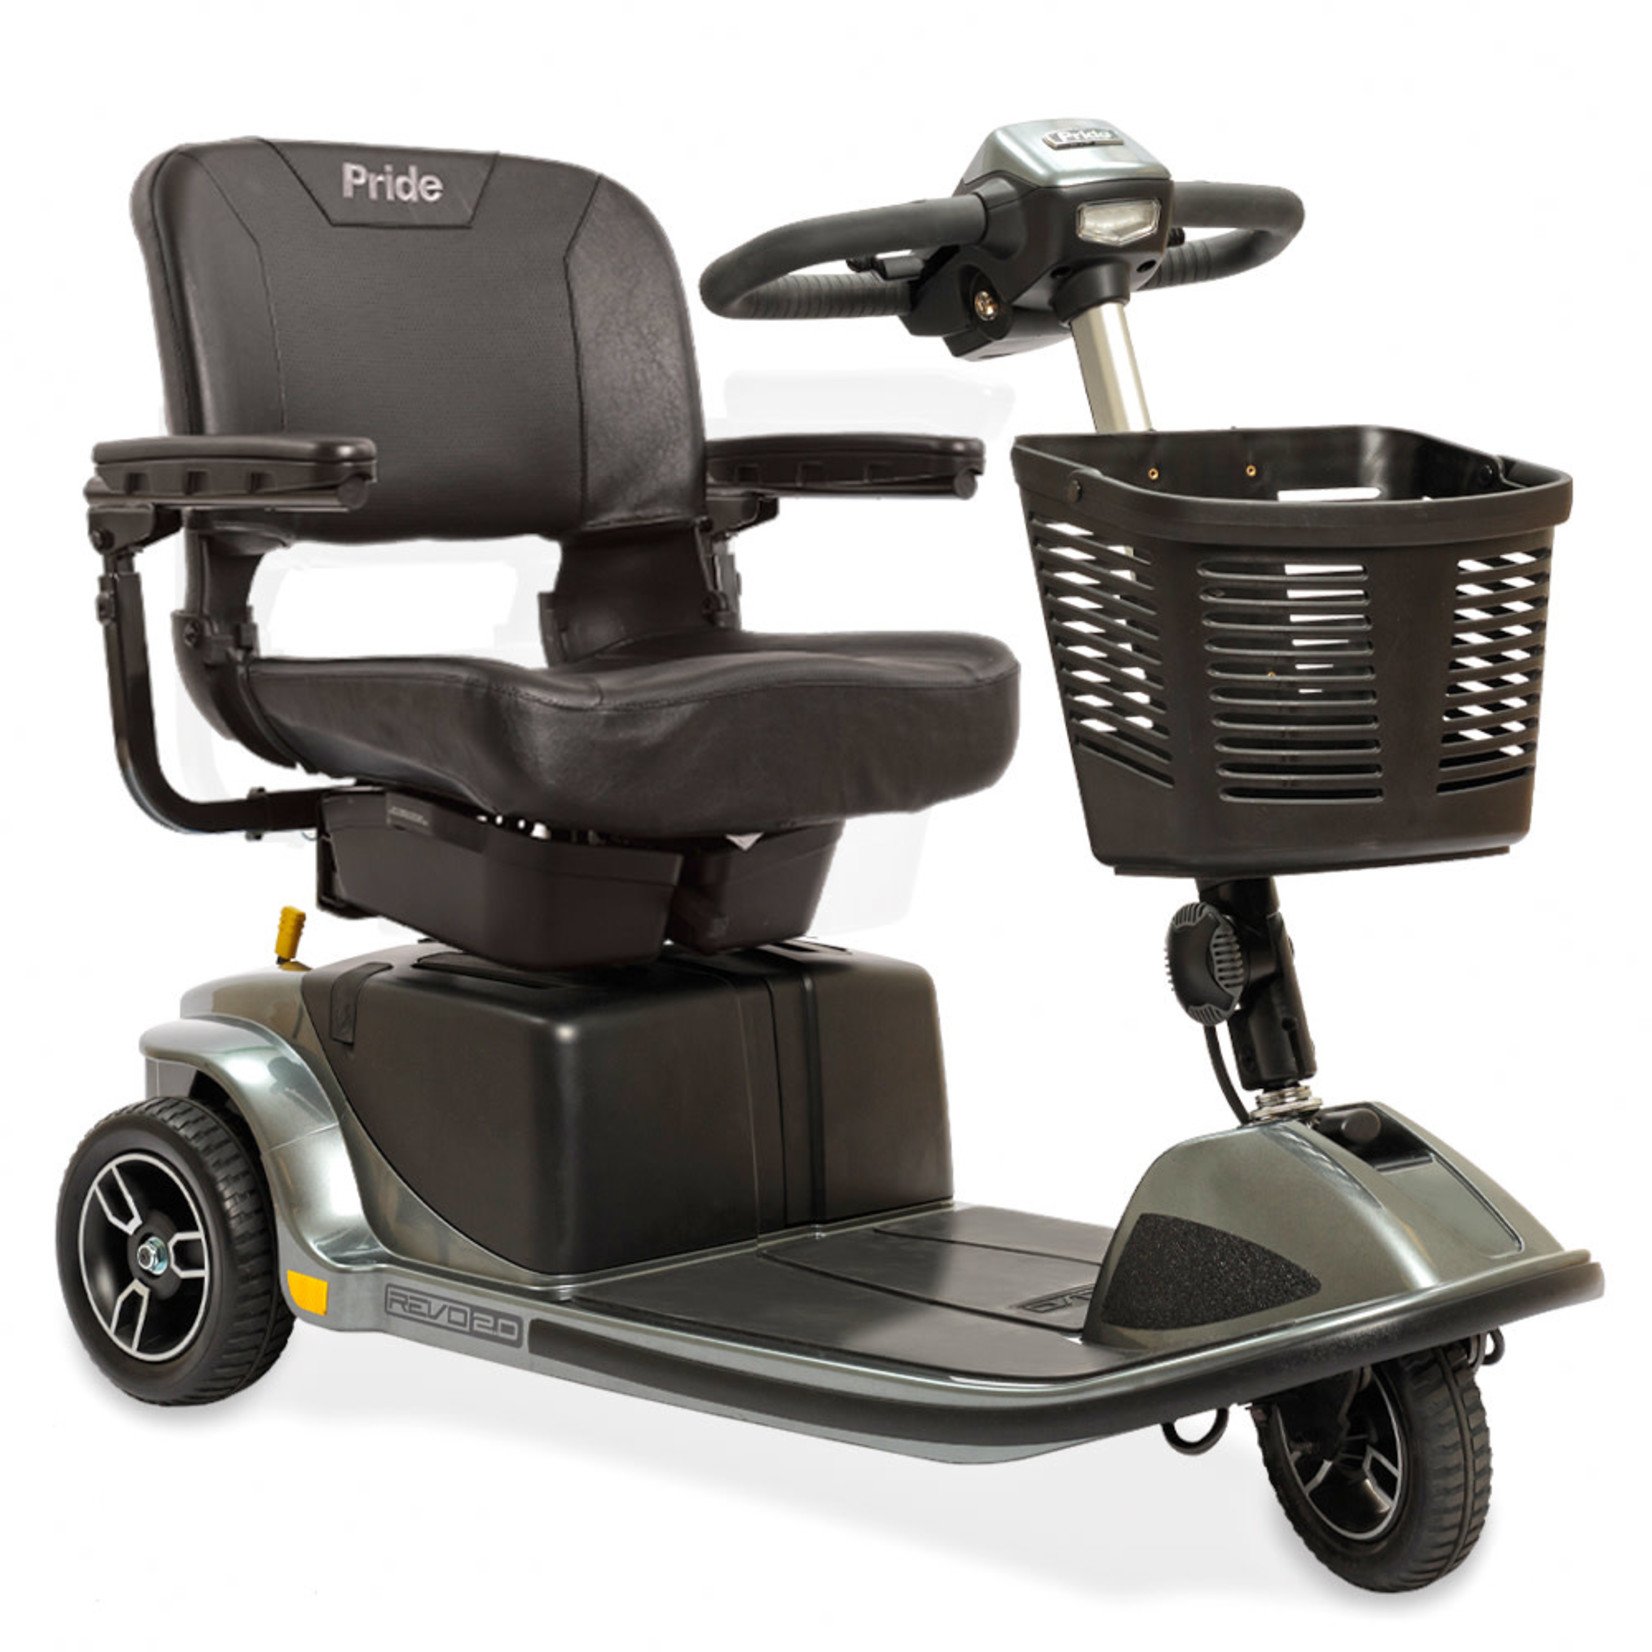 Pride Revo 2.0 3-Wheel Mobility Scooter - Safeway Medical Supply